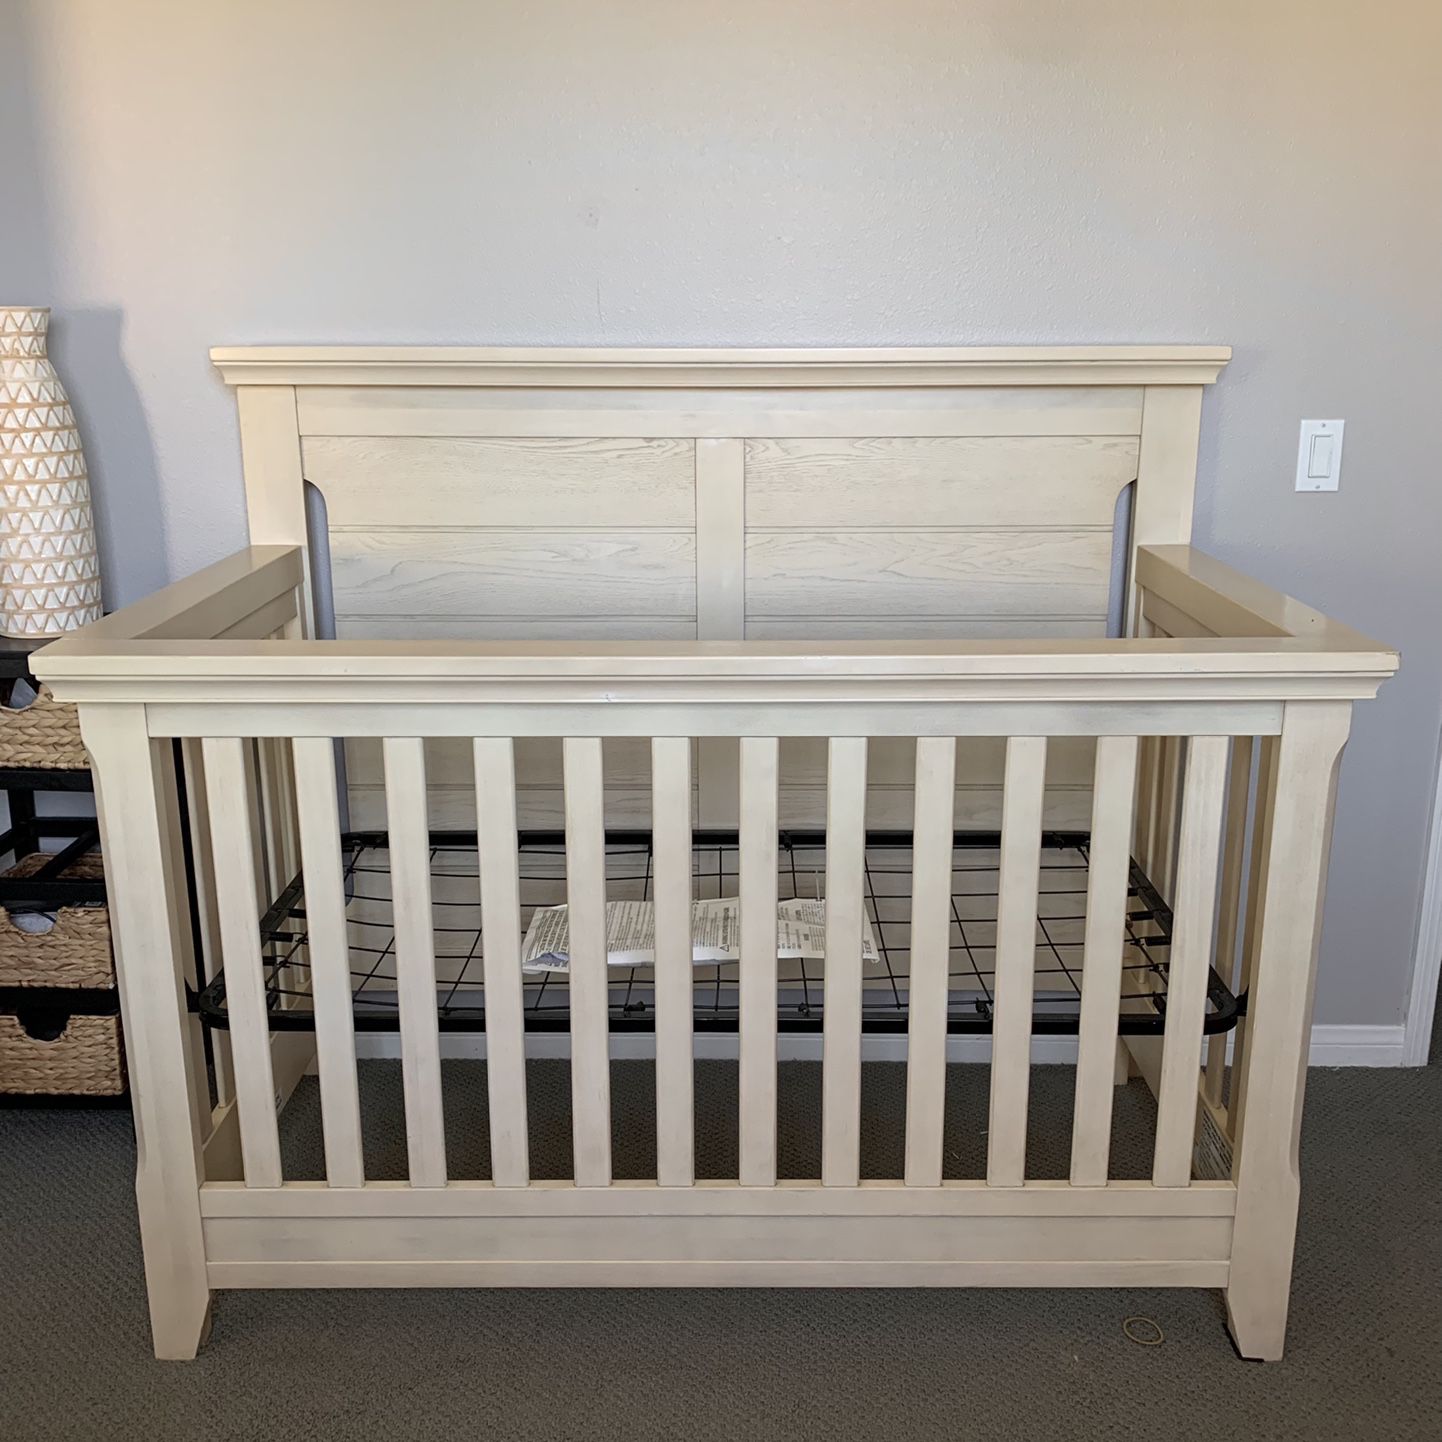 Baby Caché Overland 4-in-1 Convertible Crib in Sandstone for Sale